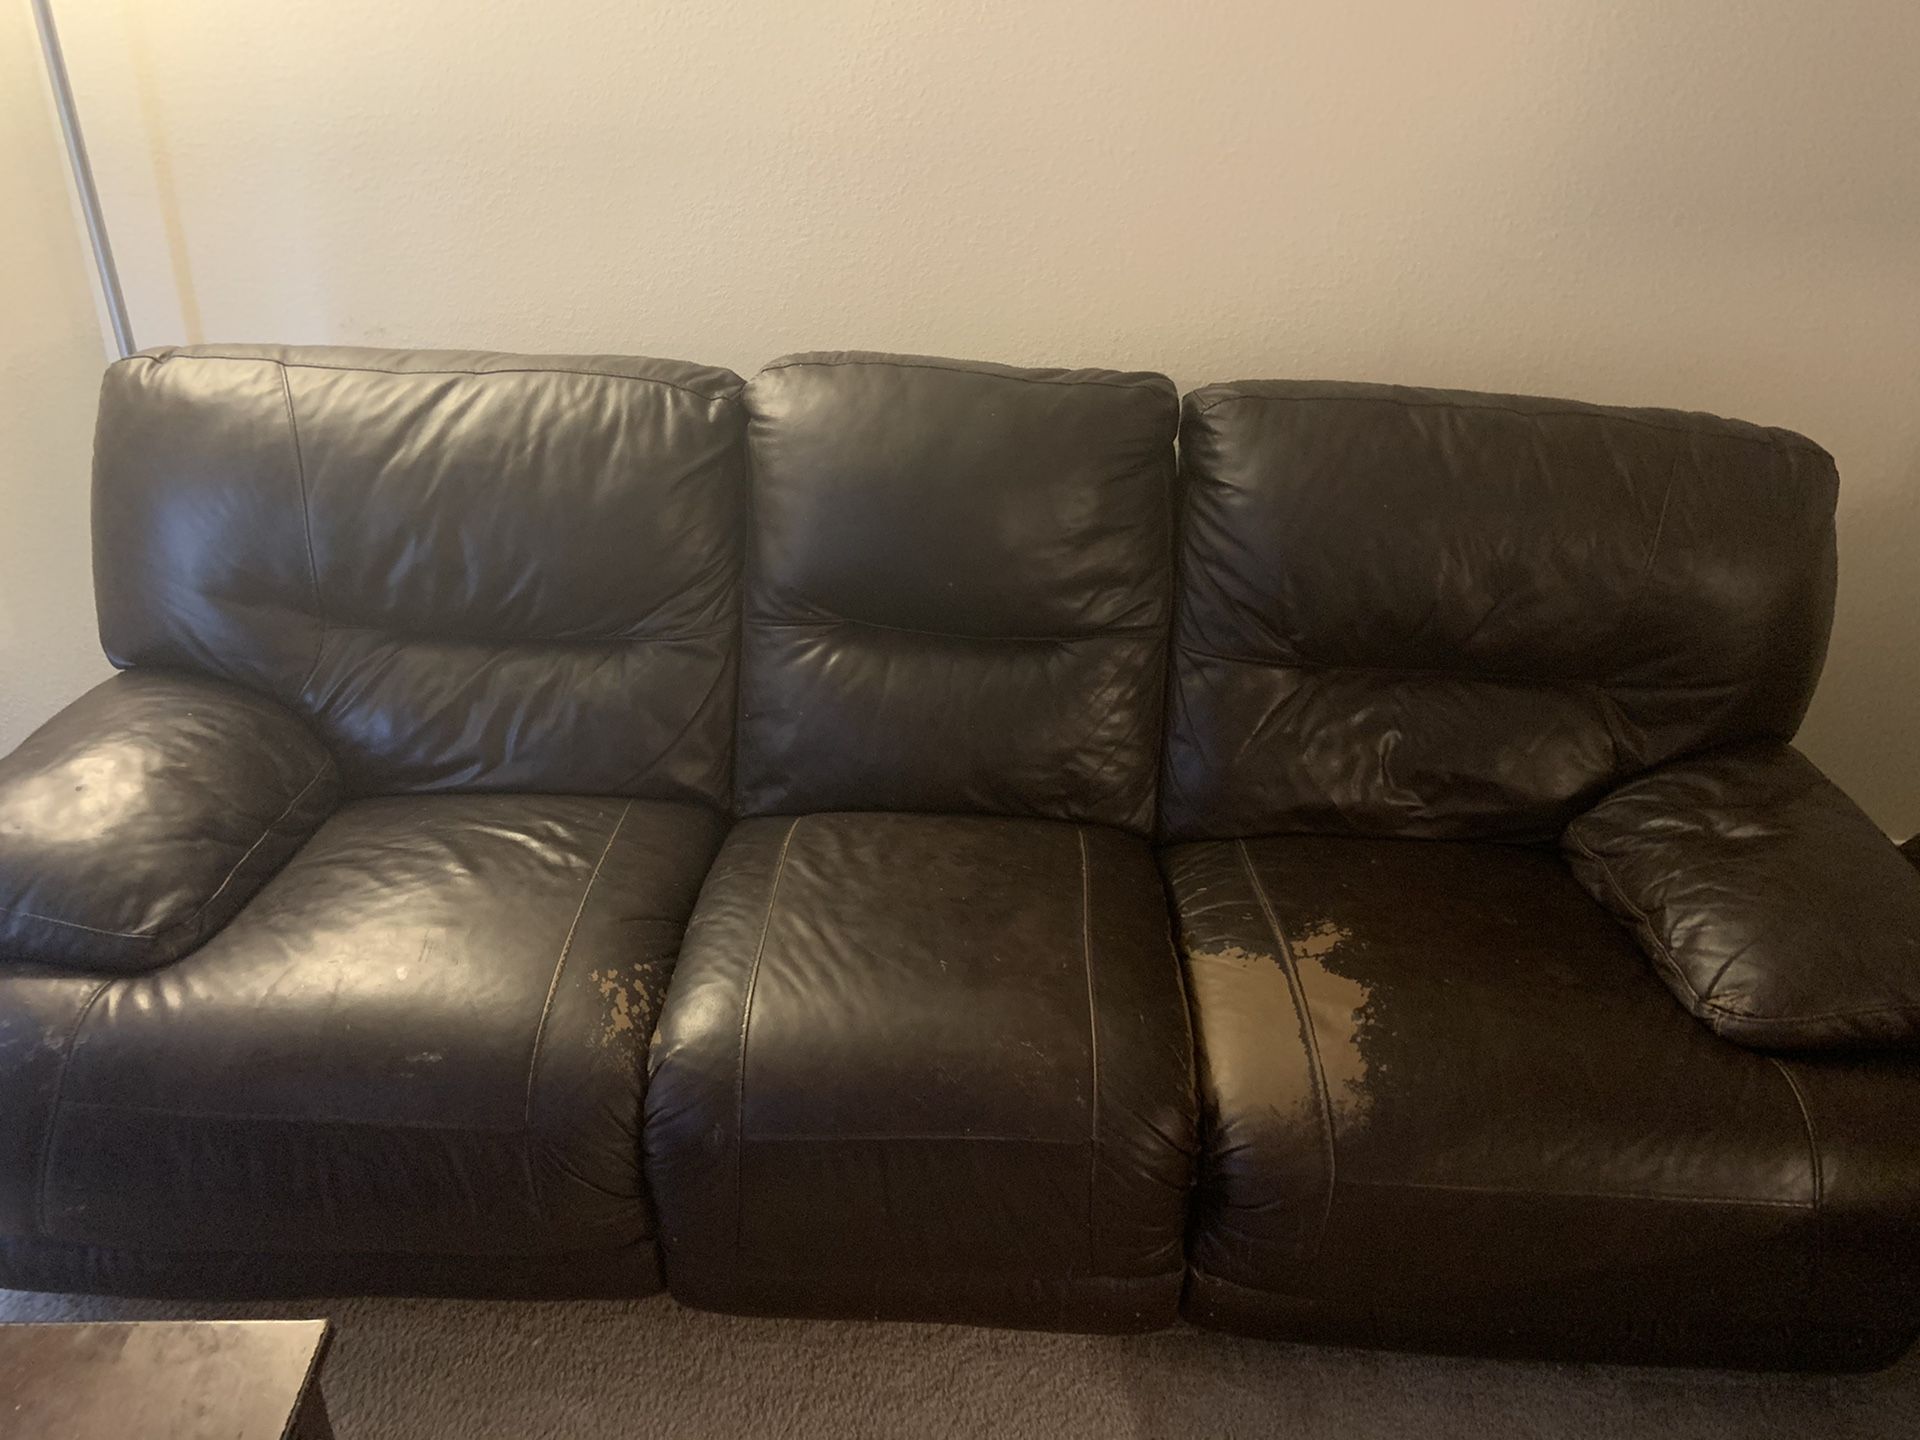 Sofa with recliner in Ok condition selling very reasonable